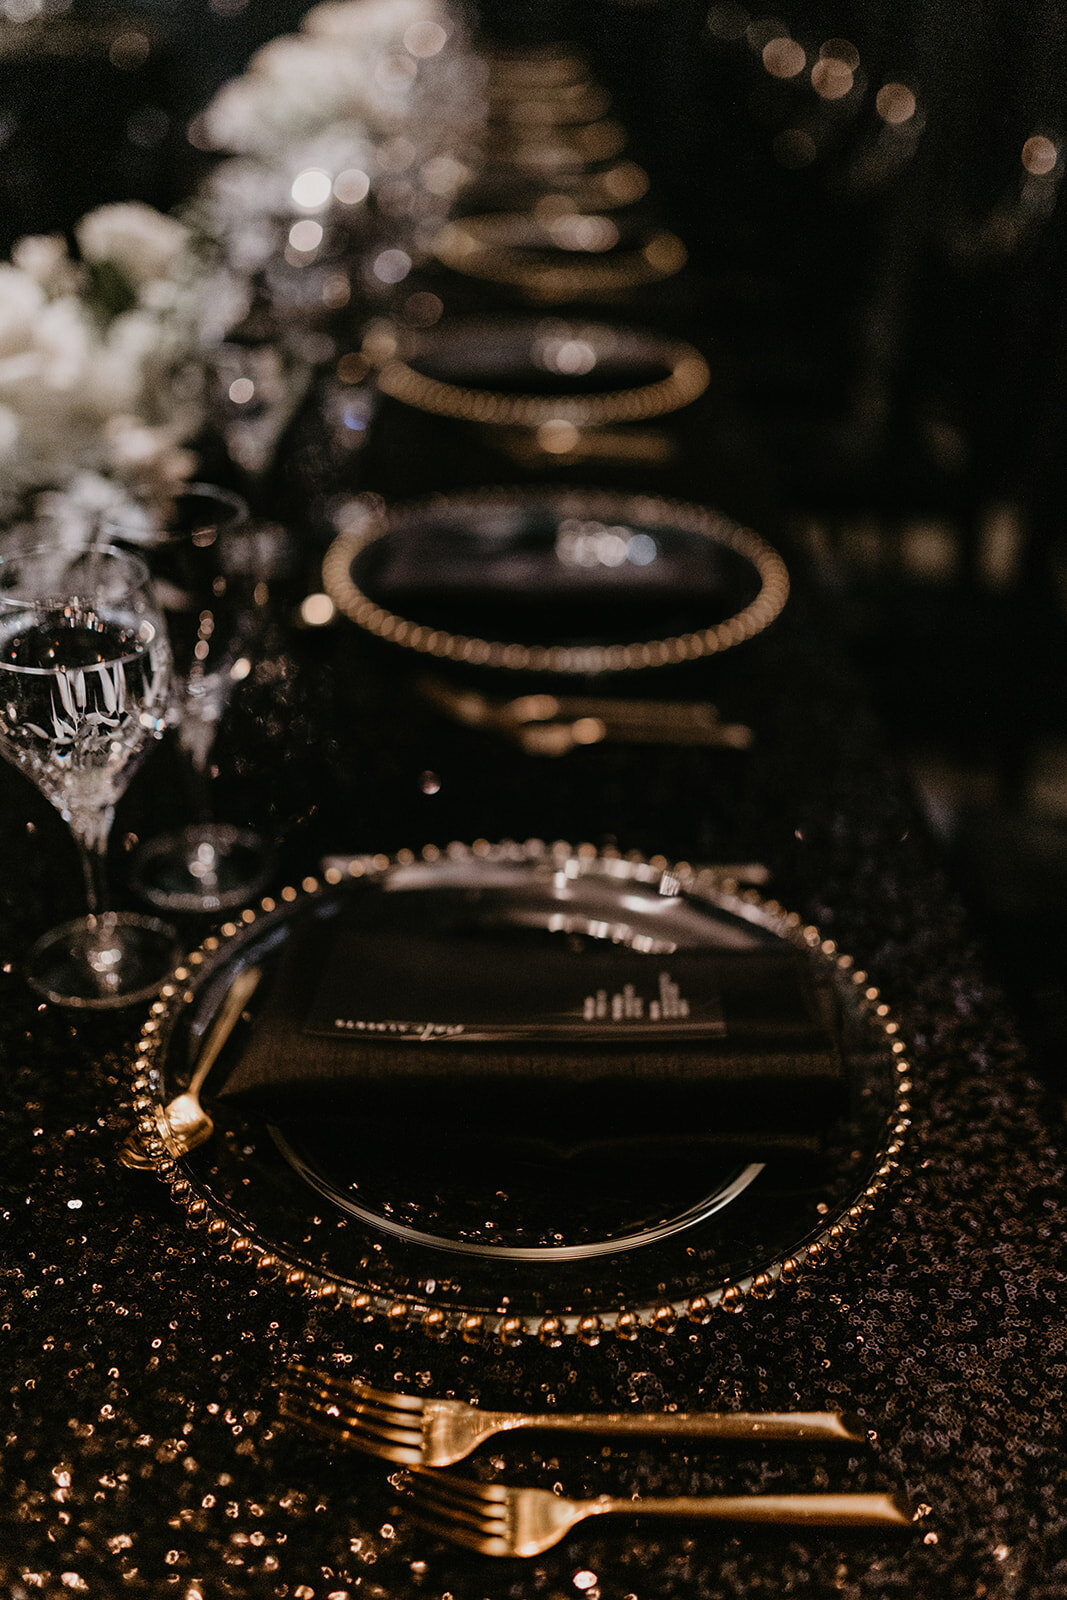 Black and gold dressed table with white floral centerpieces at wedding reception.